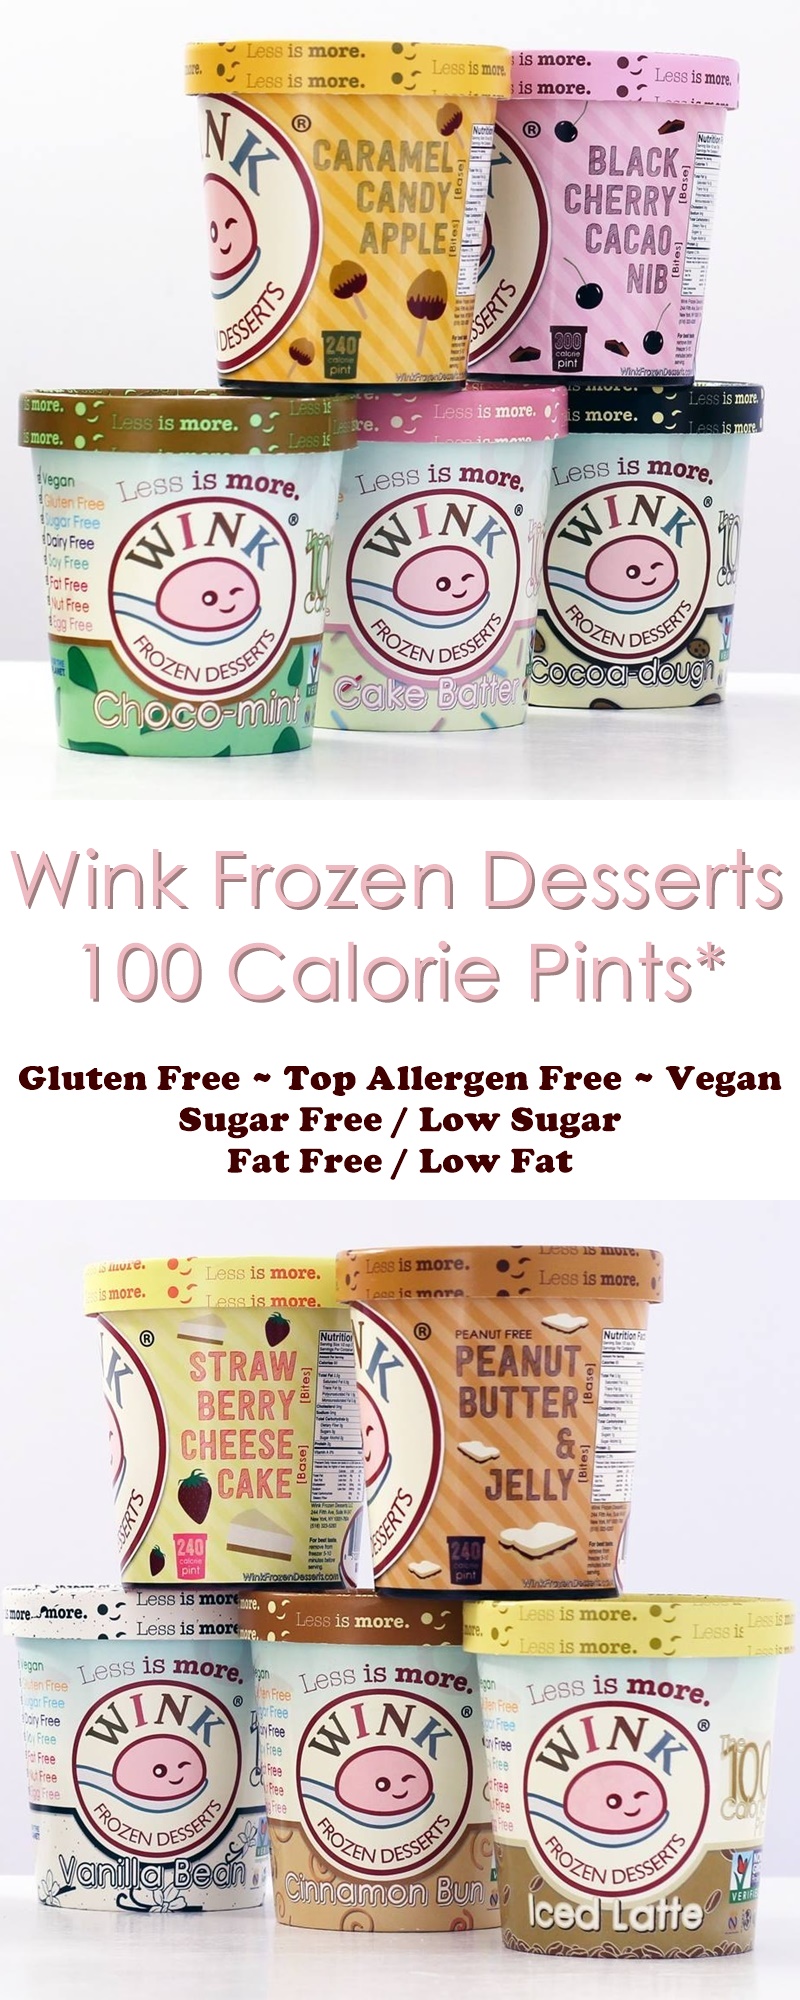 Wink Frozen Desserts - with 100 calorie PINTS that are vegan, gluten-free, sugar-free, fat-free and top allergen-free